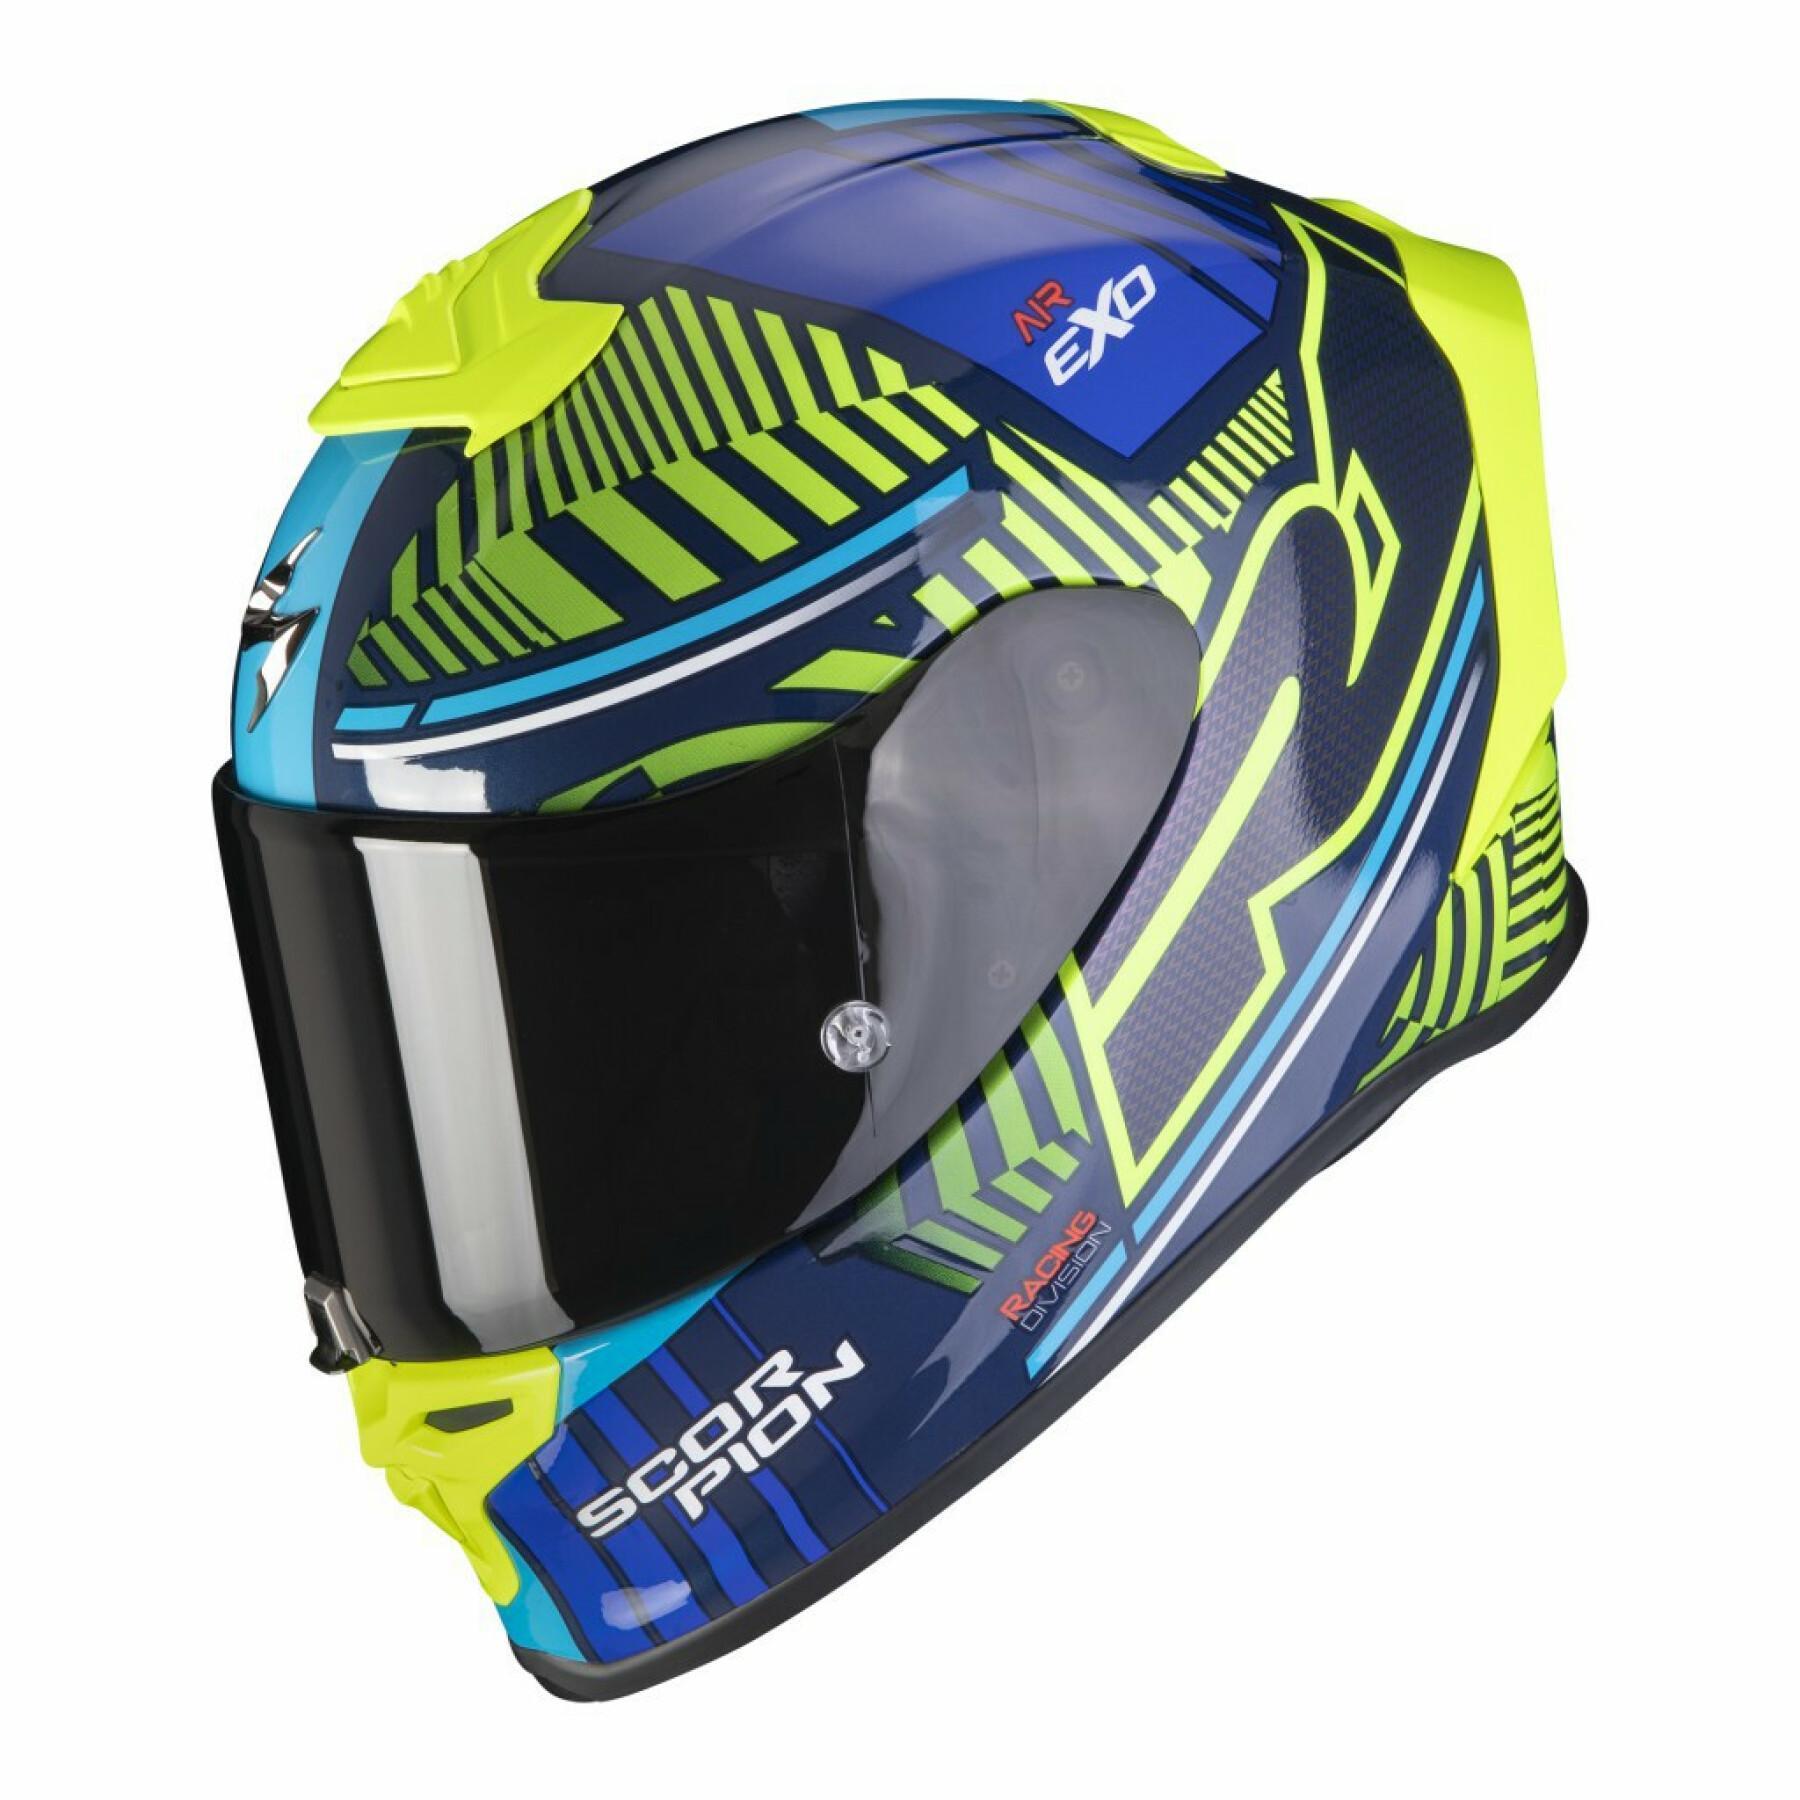 Capacete facial completo Scorpion Exo-R1 Air VICTORY